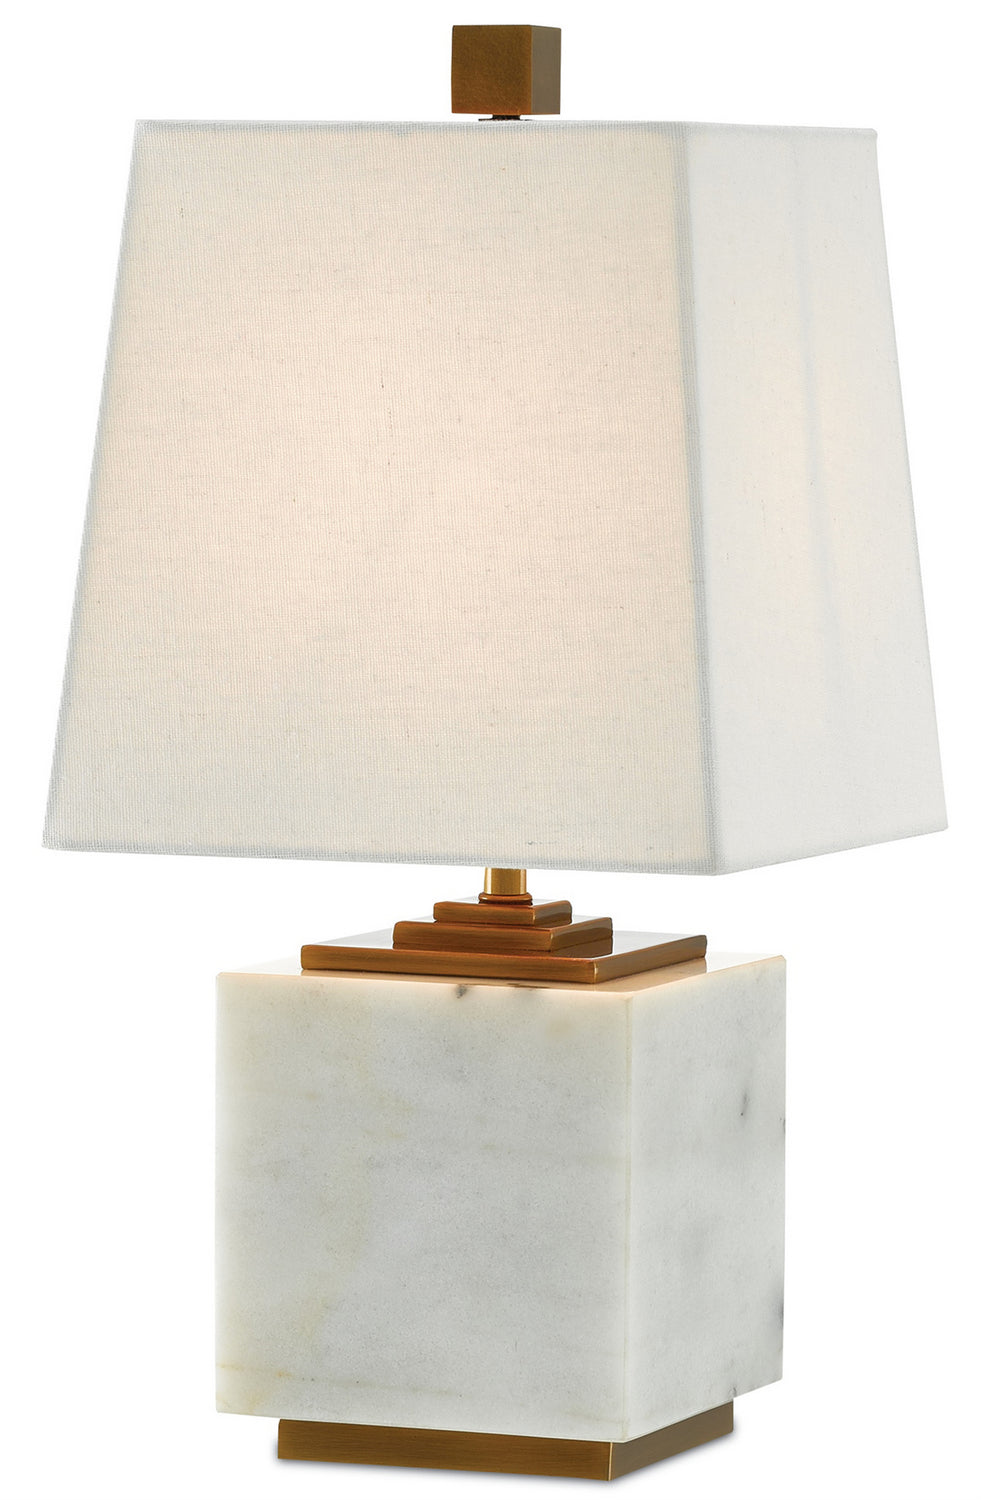 Currey and Company - One Light Table Lamp - Annelore - White/Antique Brass- Union Lighting Luminaires Decor